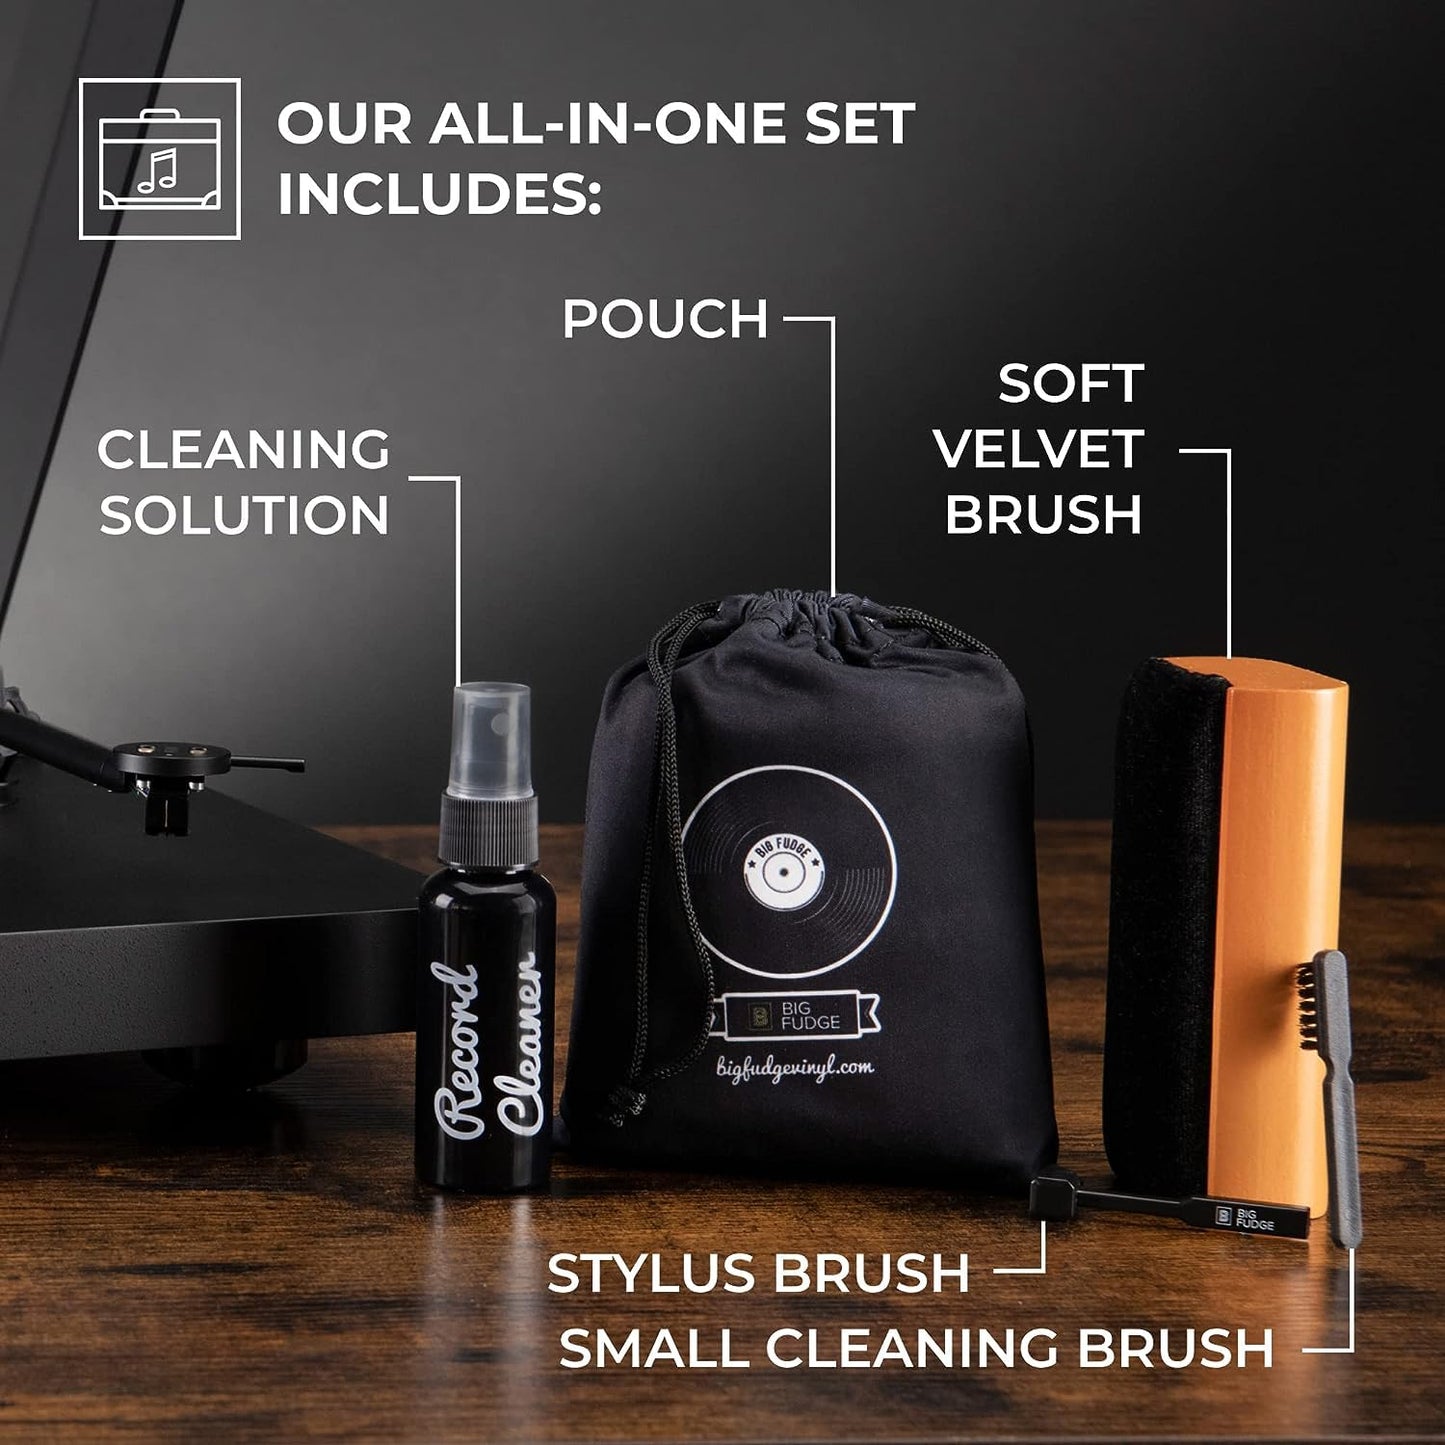 Big Fudge Vinyl Record Cleaning Kit - Complete 4-in-1 - Includes Ultra-Soft Velvet Record Brush, XL Cleaning Liquid, Stylus Brush and Storage Pouch! Will NOT Scratch Your Records